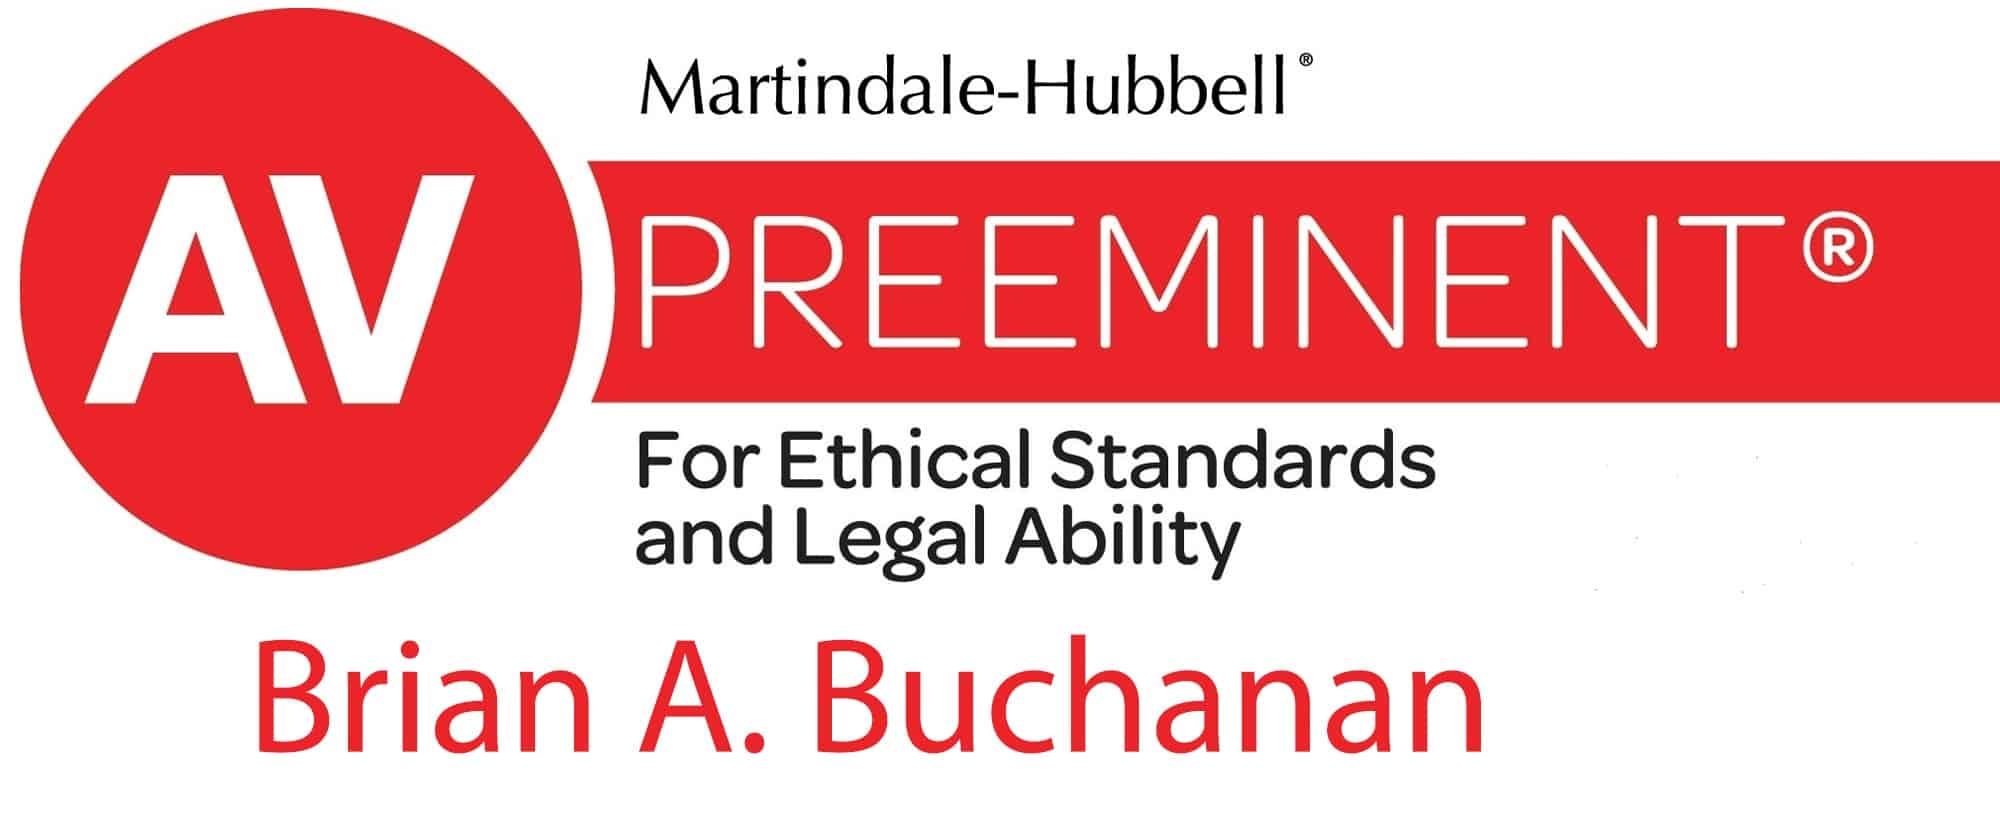 Martindale-Hubbell AV Preeminent for ethical standards and legal ability Brian A Buchanan logo